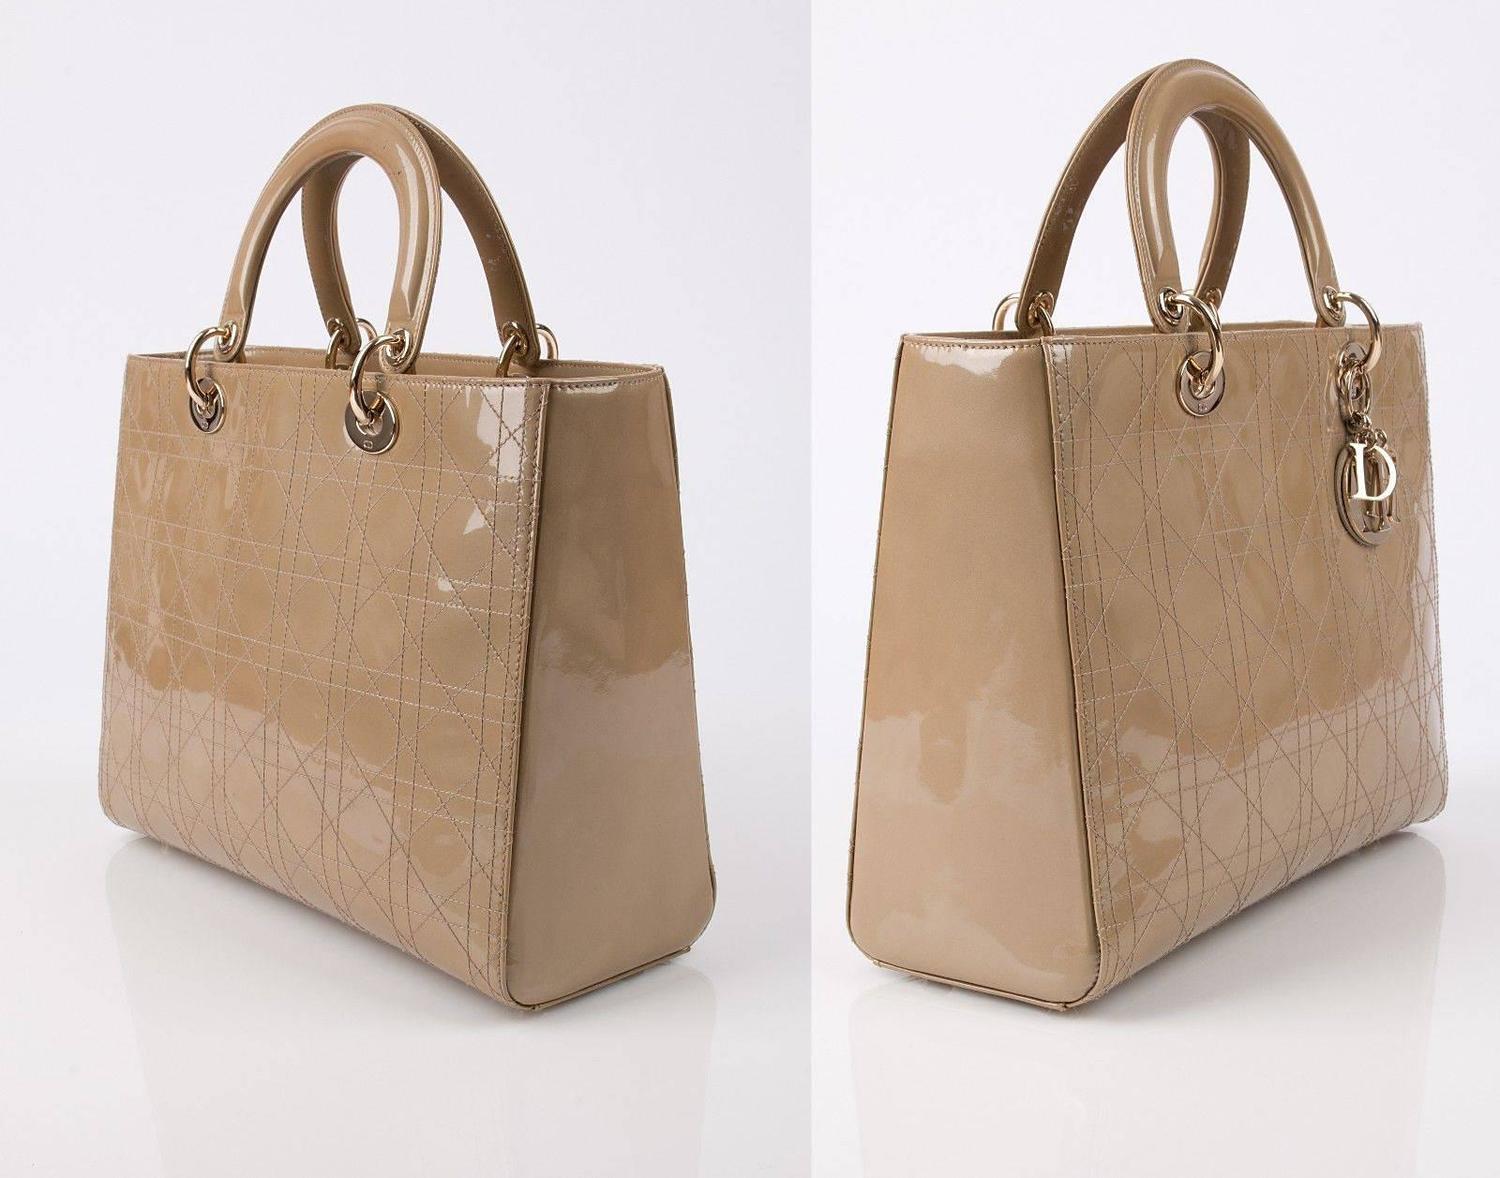 CHRISTIAN DIOR &quot;Lady&quot; Sand / Beige Patent Leather Handbag Tote Purse + Strap For Sale at 1stdibs